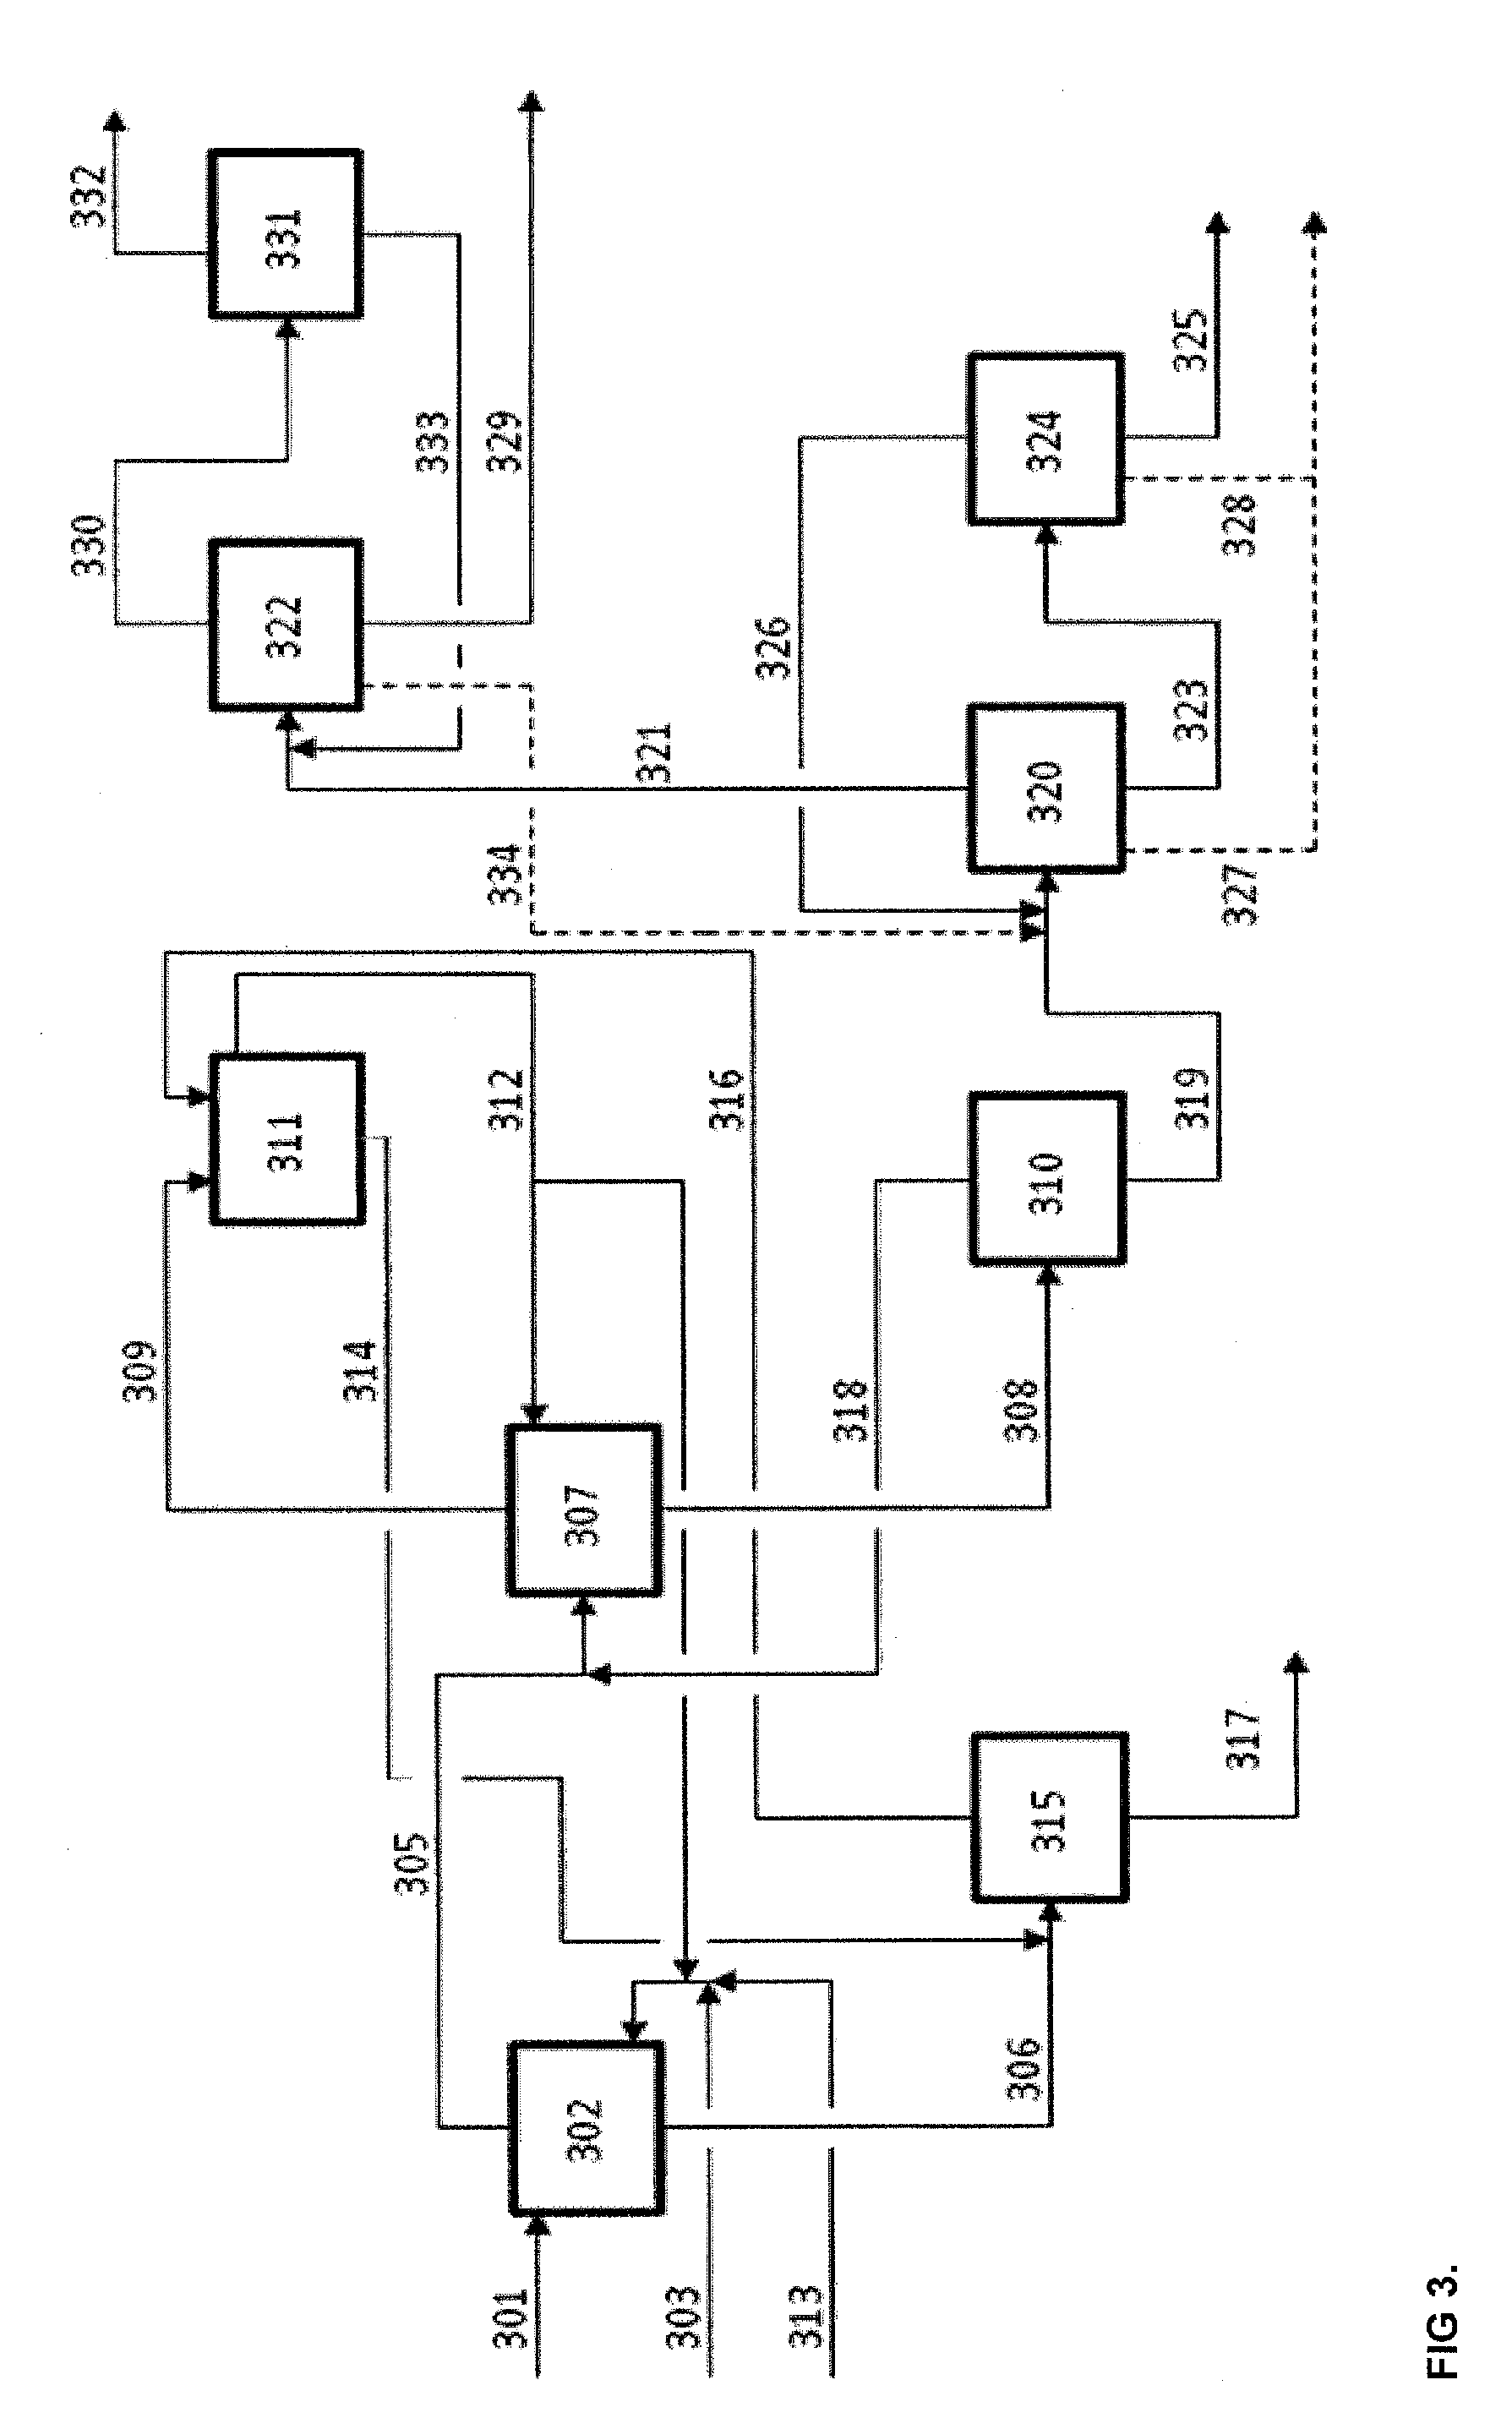 Method and an arrangement for separating at least one carboxylic acid and furfural from a dilute aqueous mixture thereof